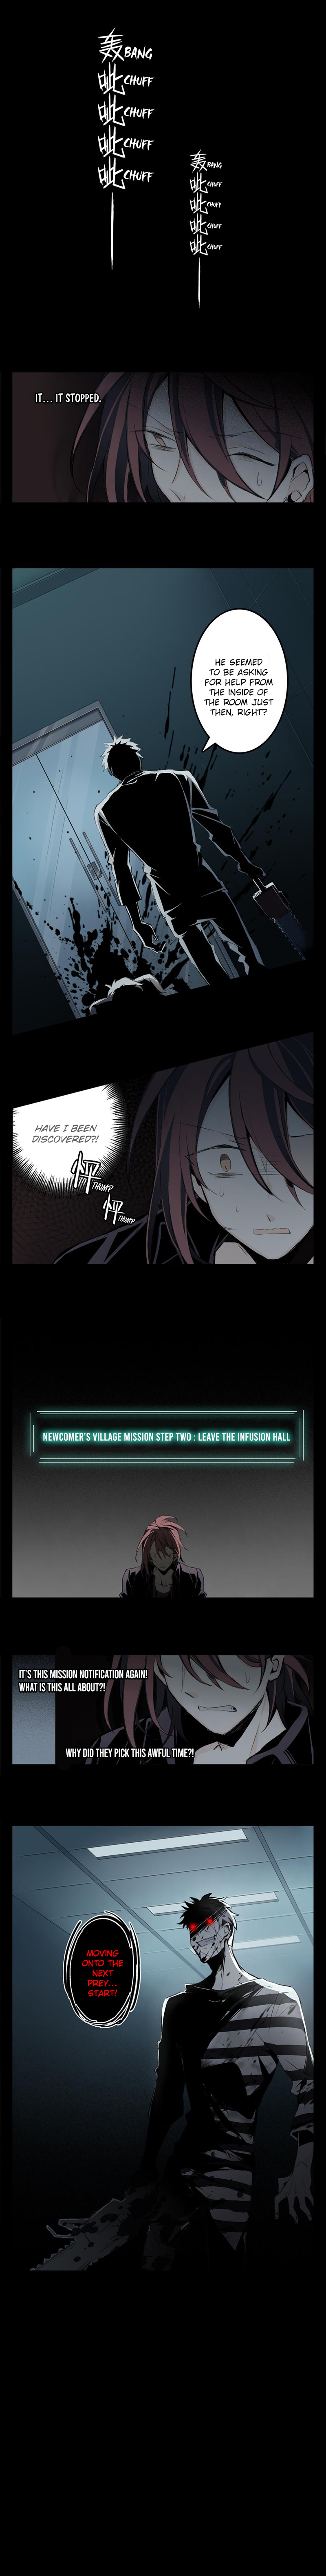 Welcome to the Nightmare Game Ch. 1 Newcomer’s Village